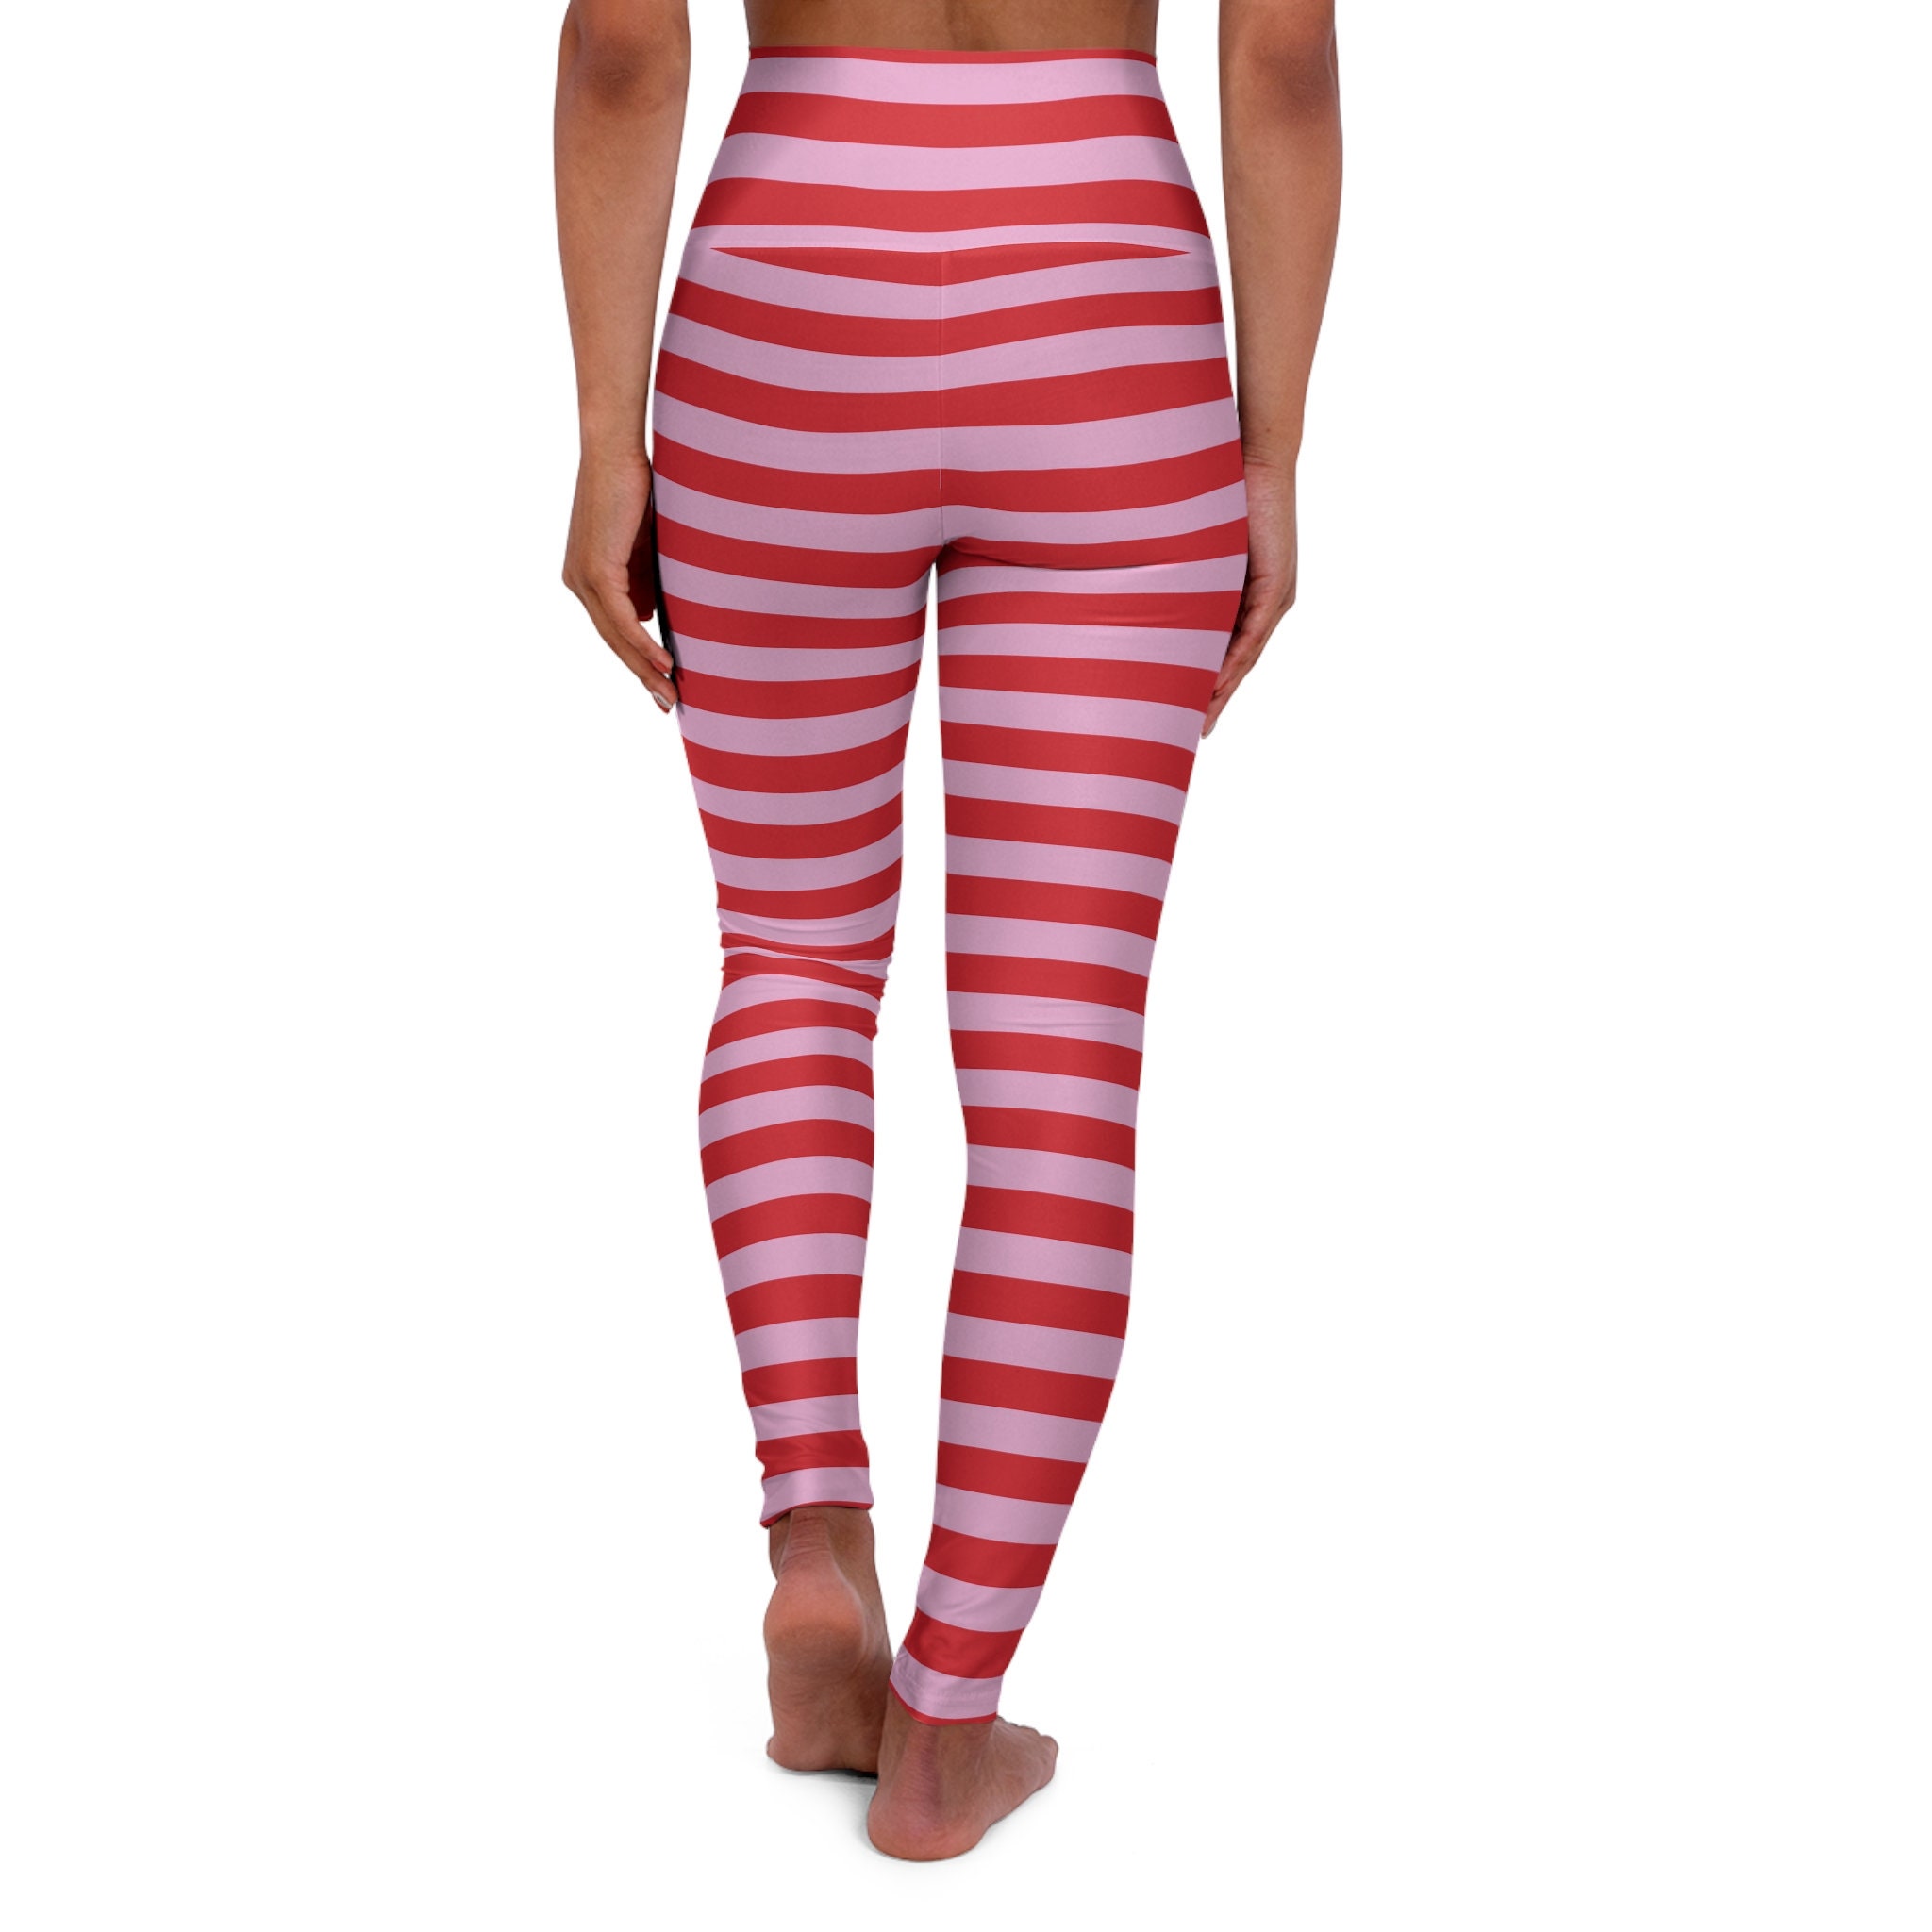 Pink & Red Striped Leggings Valentine's Day Leggings Cute Gym